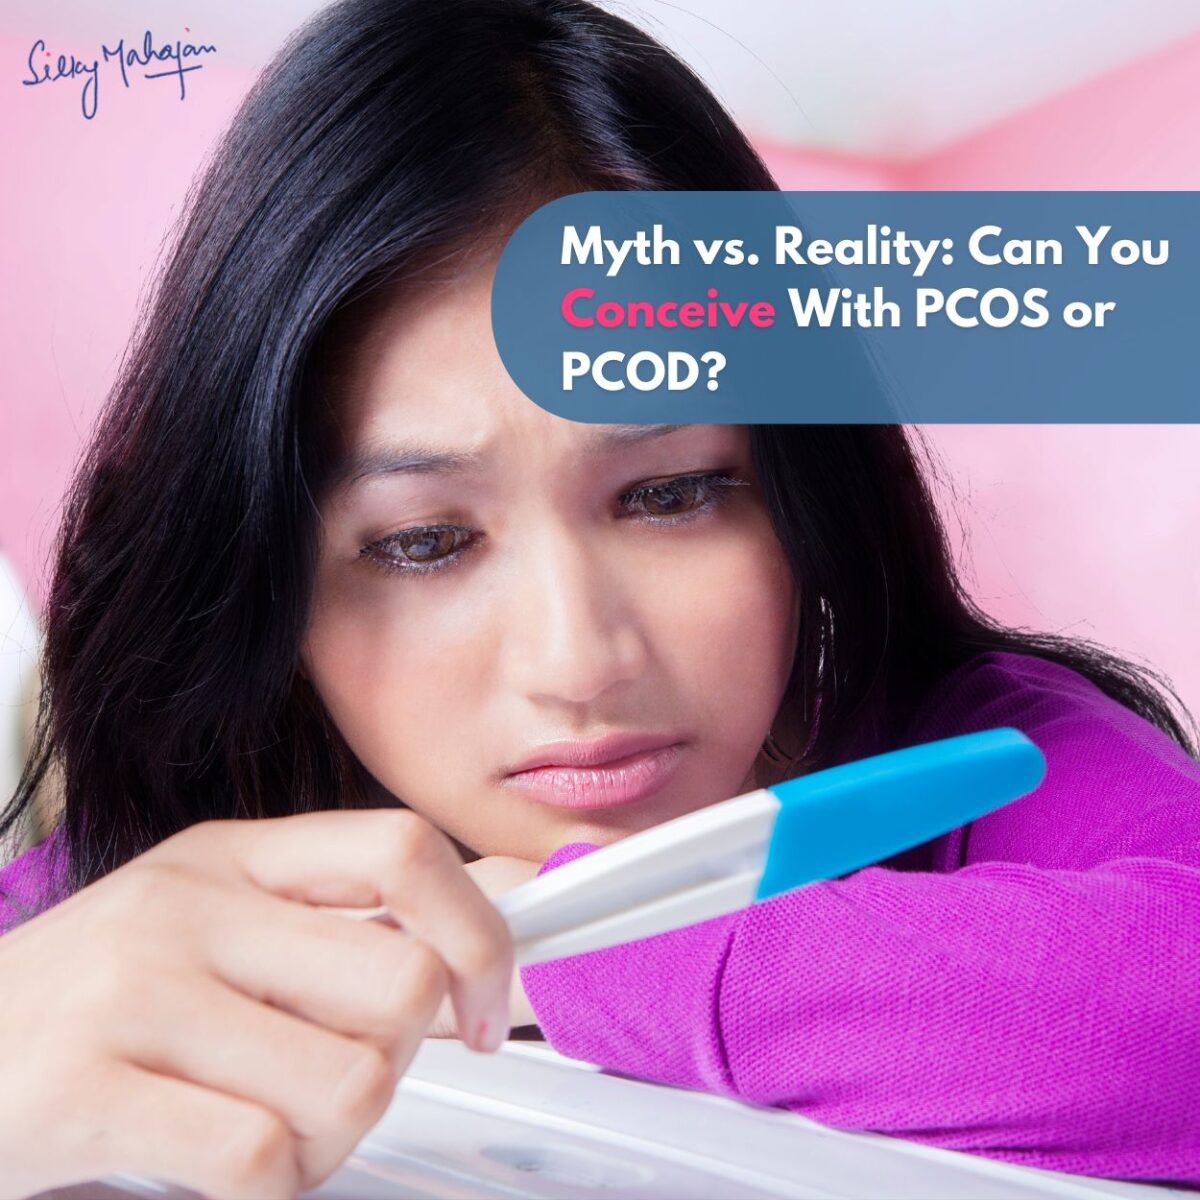 Myth vs. Reality: Can You Conceive With PCOS or PCOD?